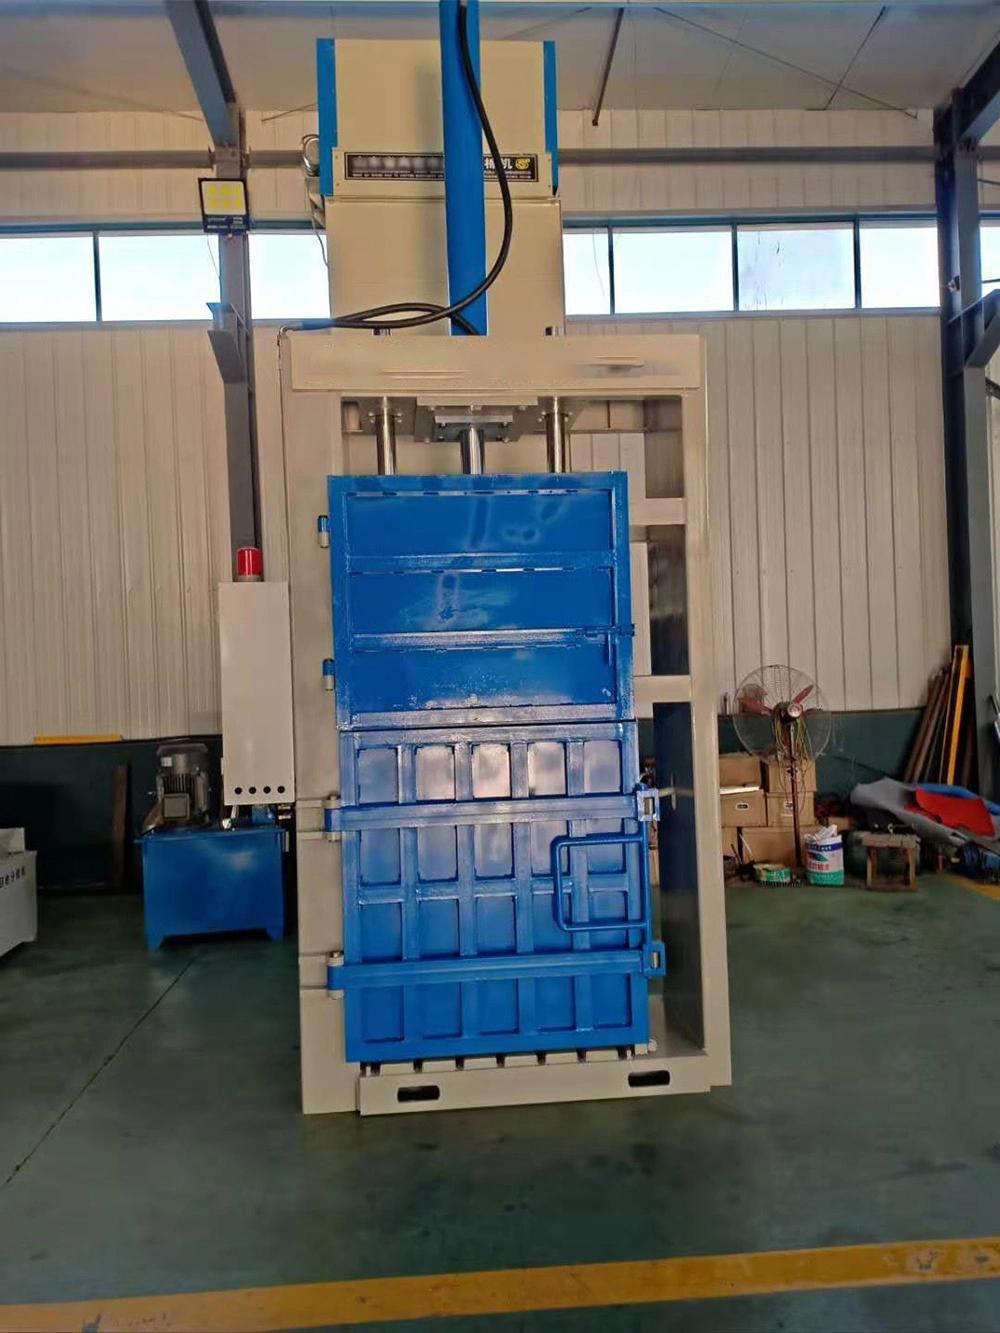 High Quality Vertical Pressure Balance System Baler Hydraulic Press Waste Plastic Film Packaging Machine Factory Price Baler for Recycling Industry